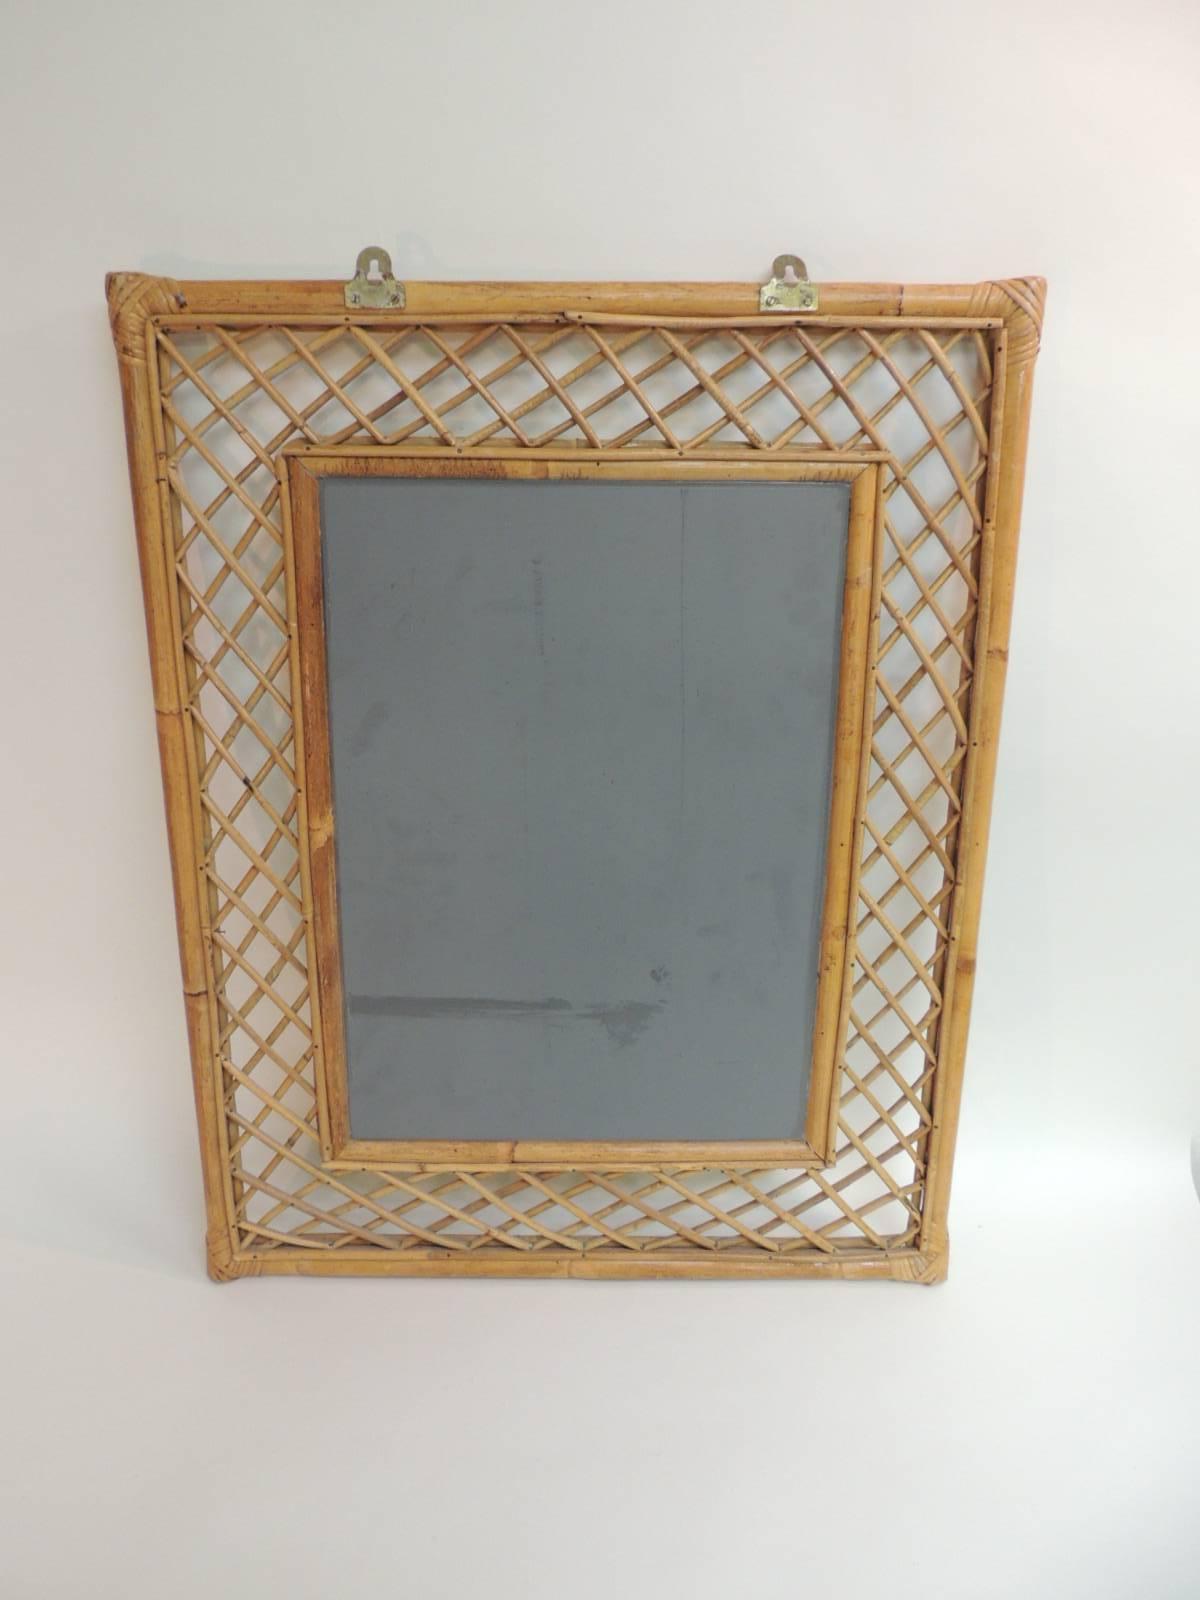 Hand-Crafted Vintage Woven Bamboo Mirror